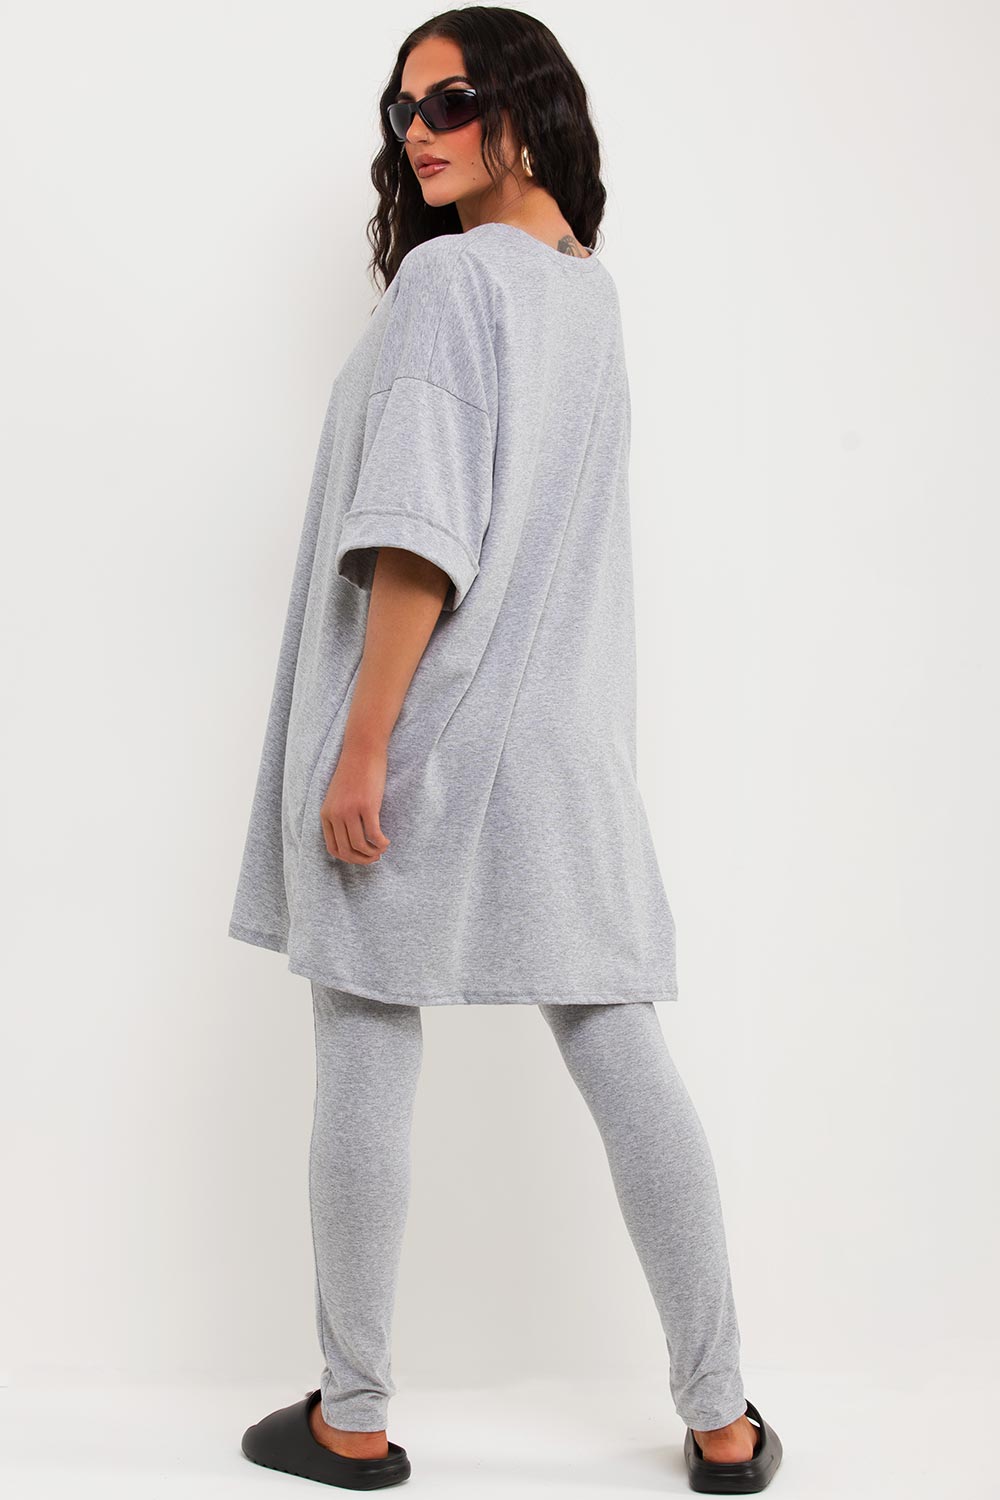 oversized t shirt and leggings co ord two piece set womens